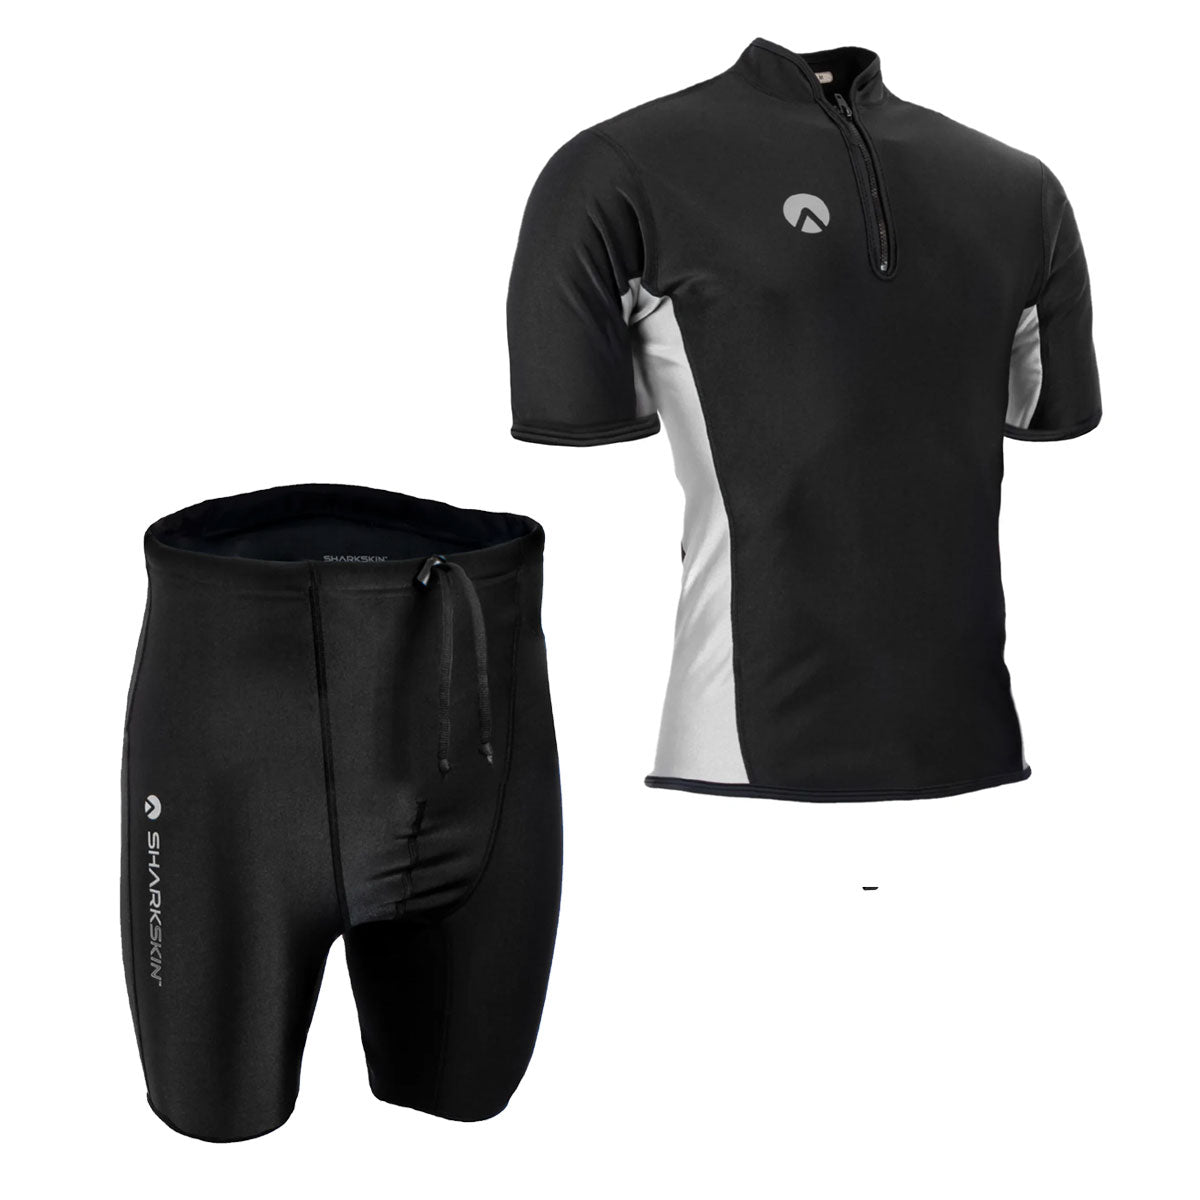 Chillproof Short Sleeve Chest Zip with Short Pants Package - Male